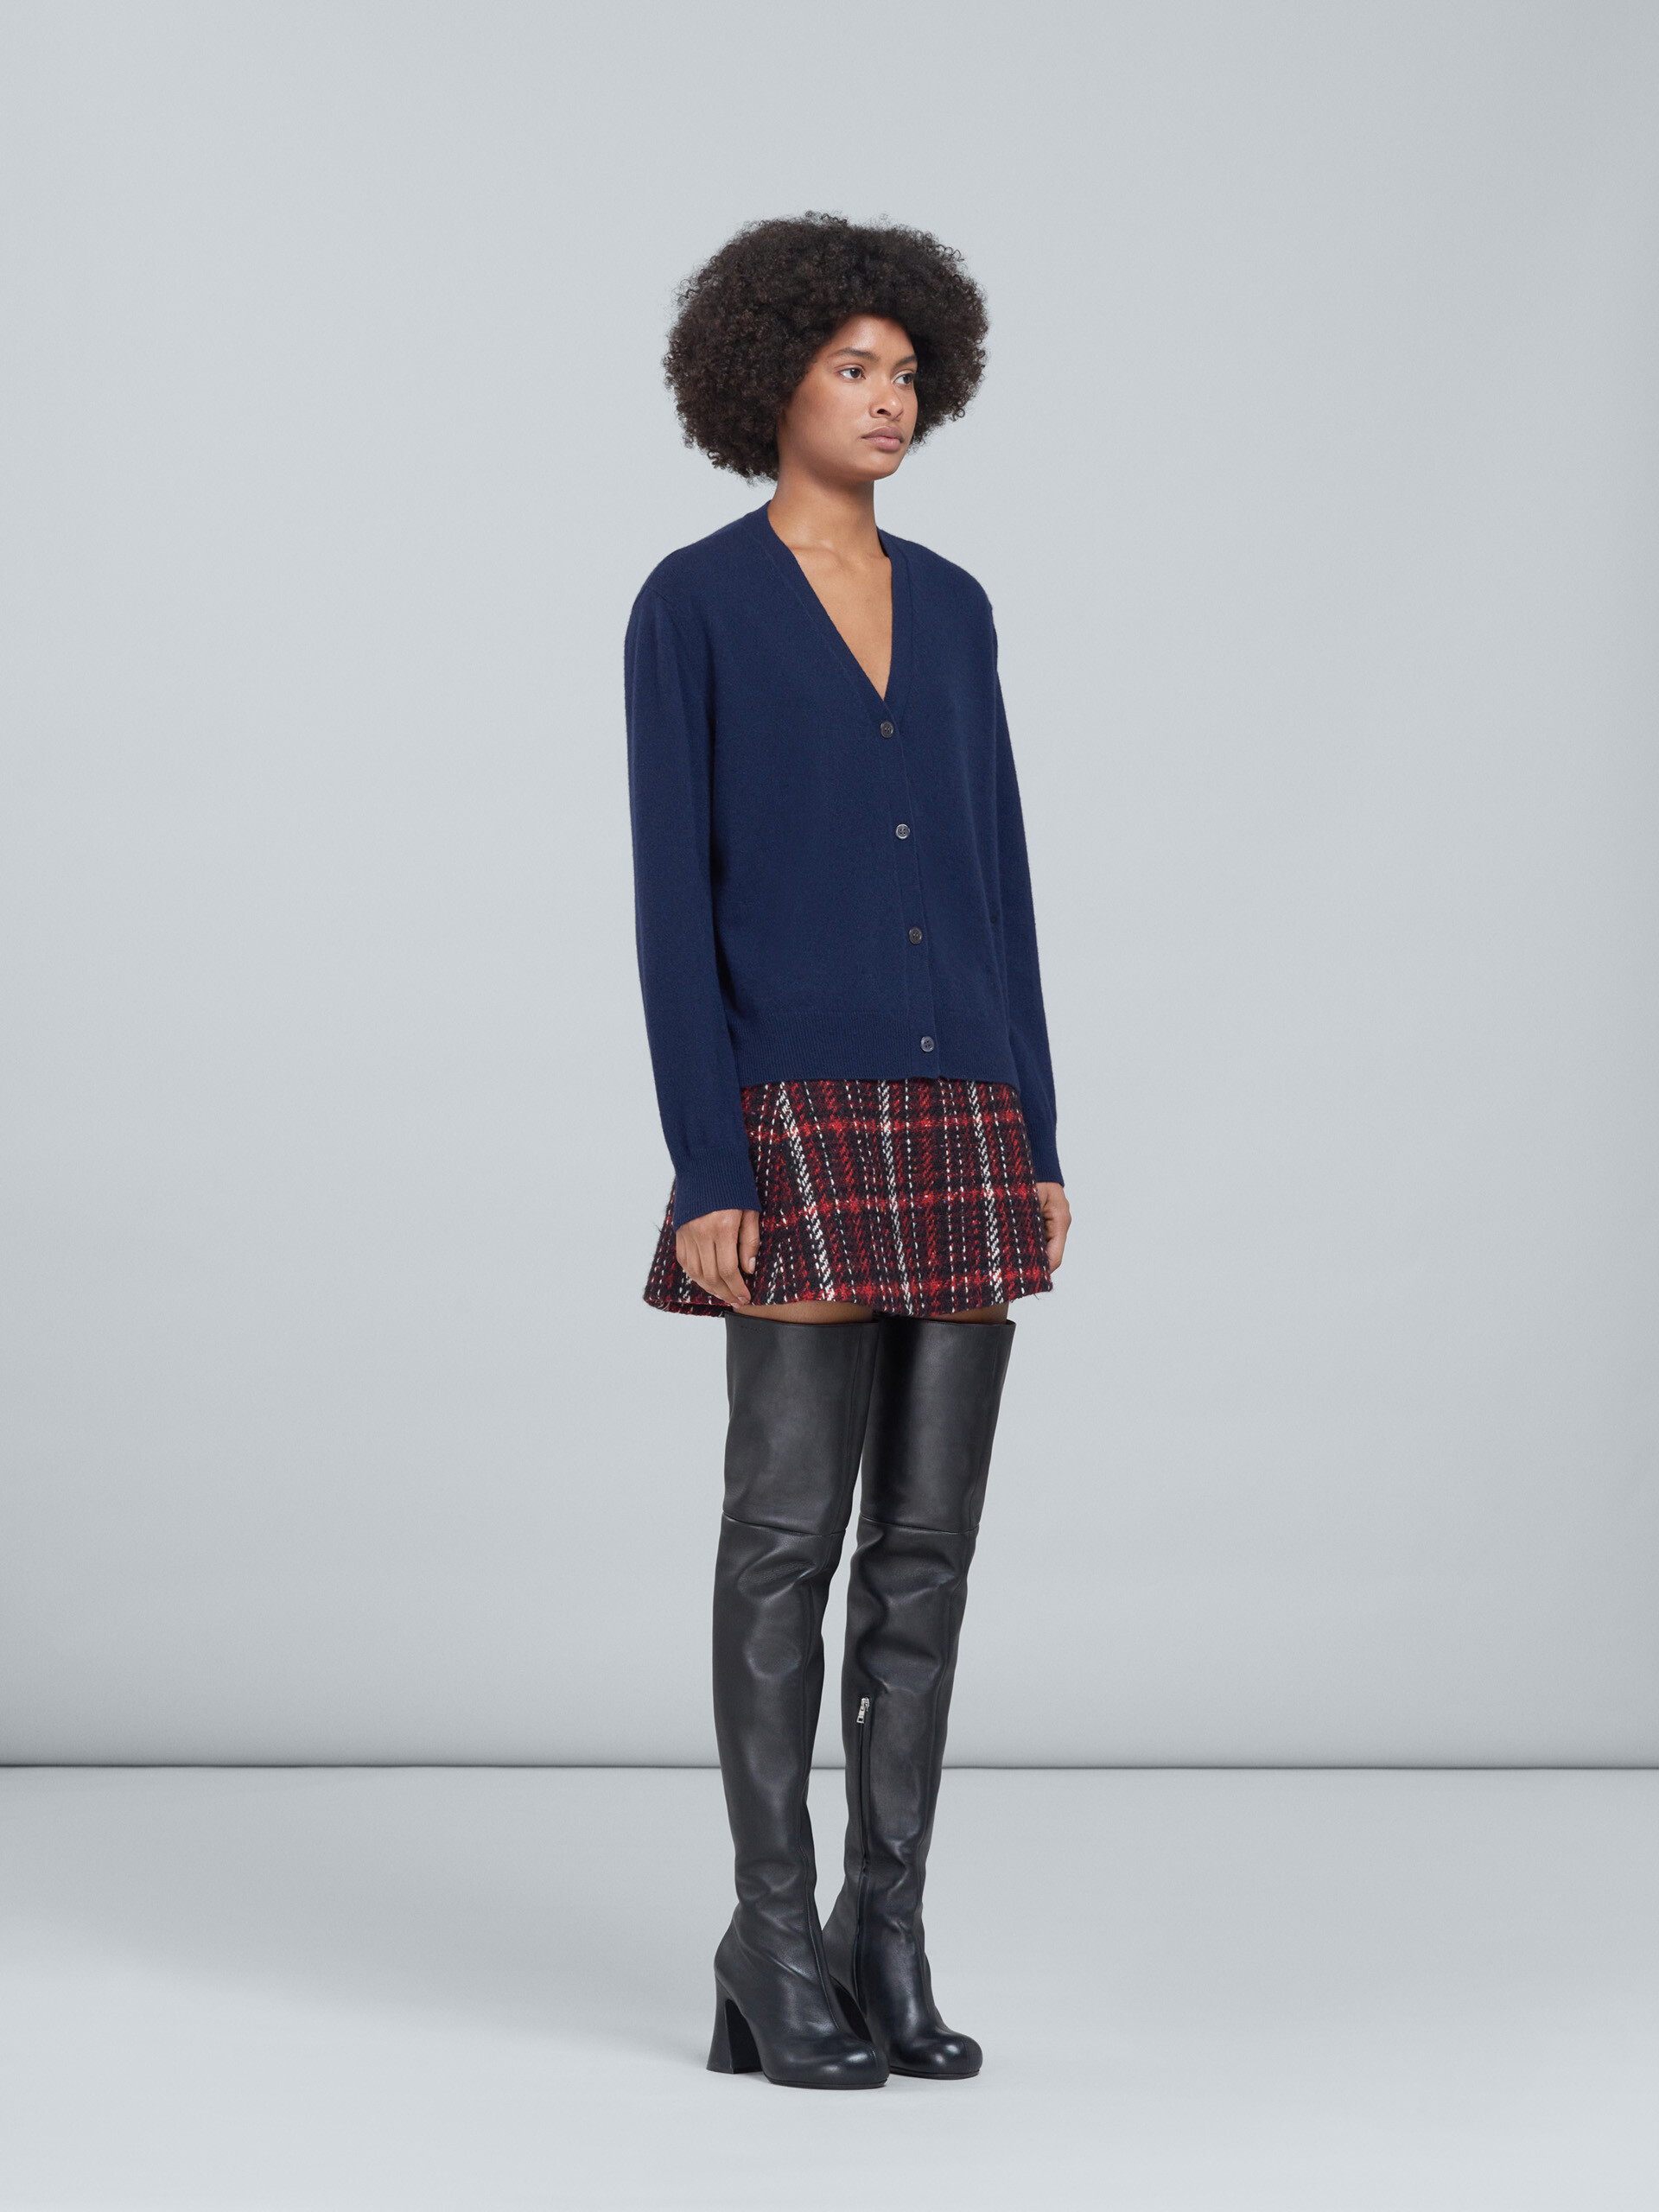 Cashmere cardigan - Pullovers - Image 5